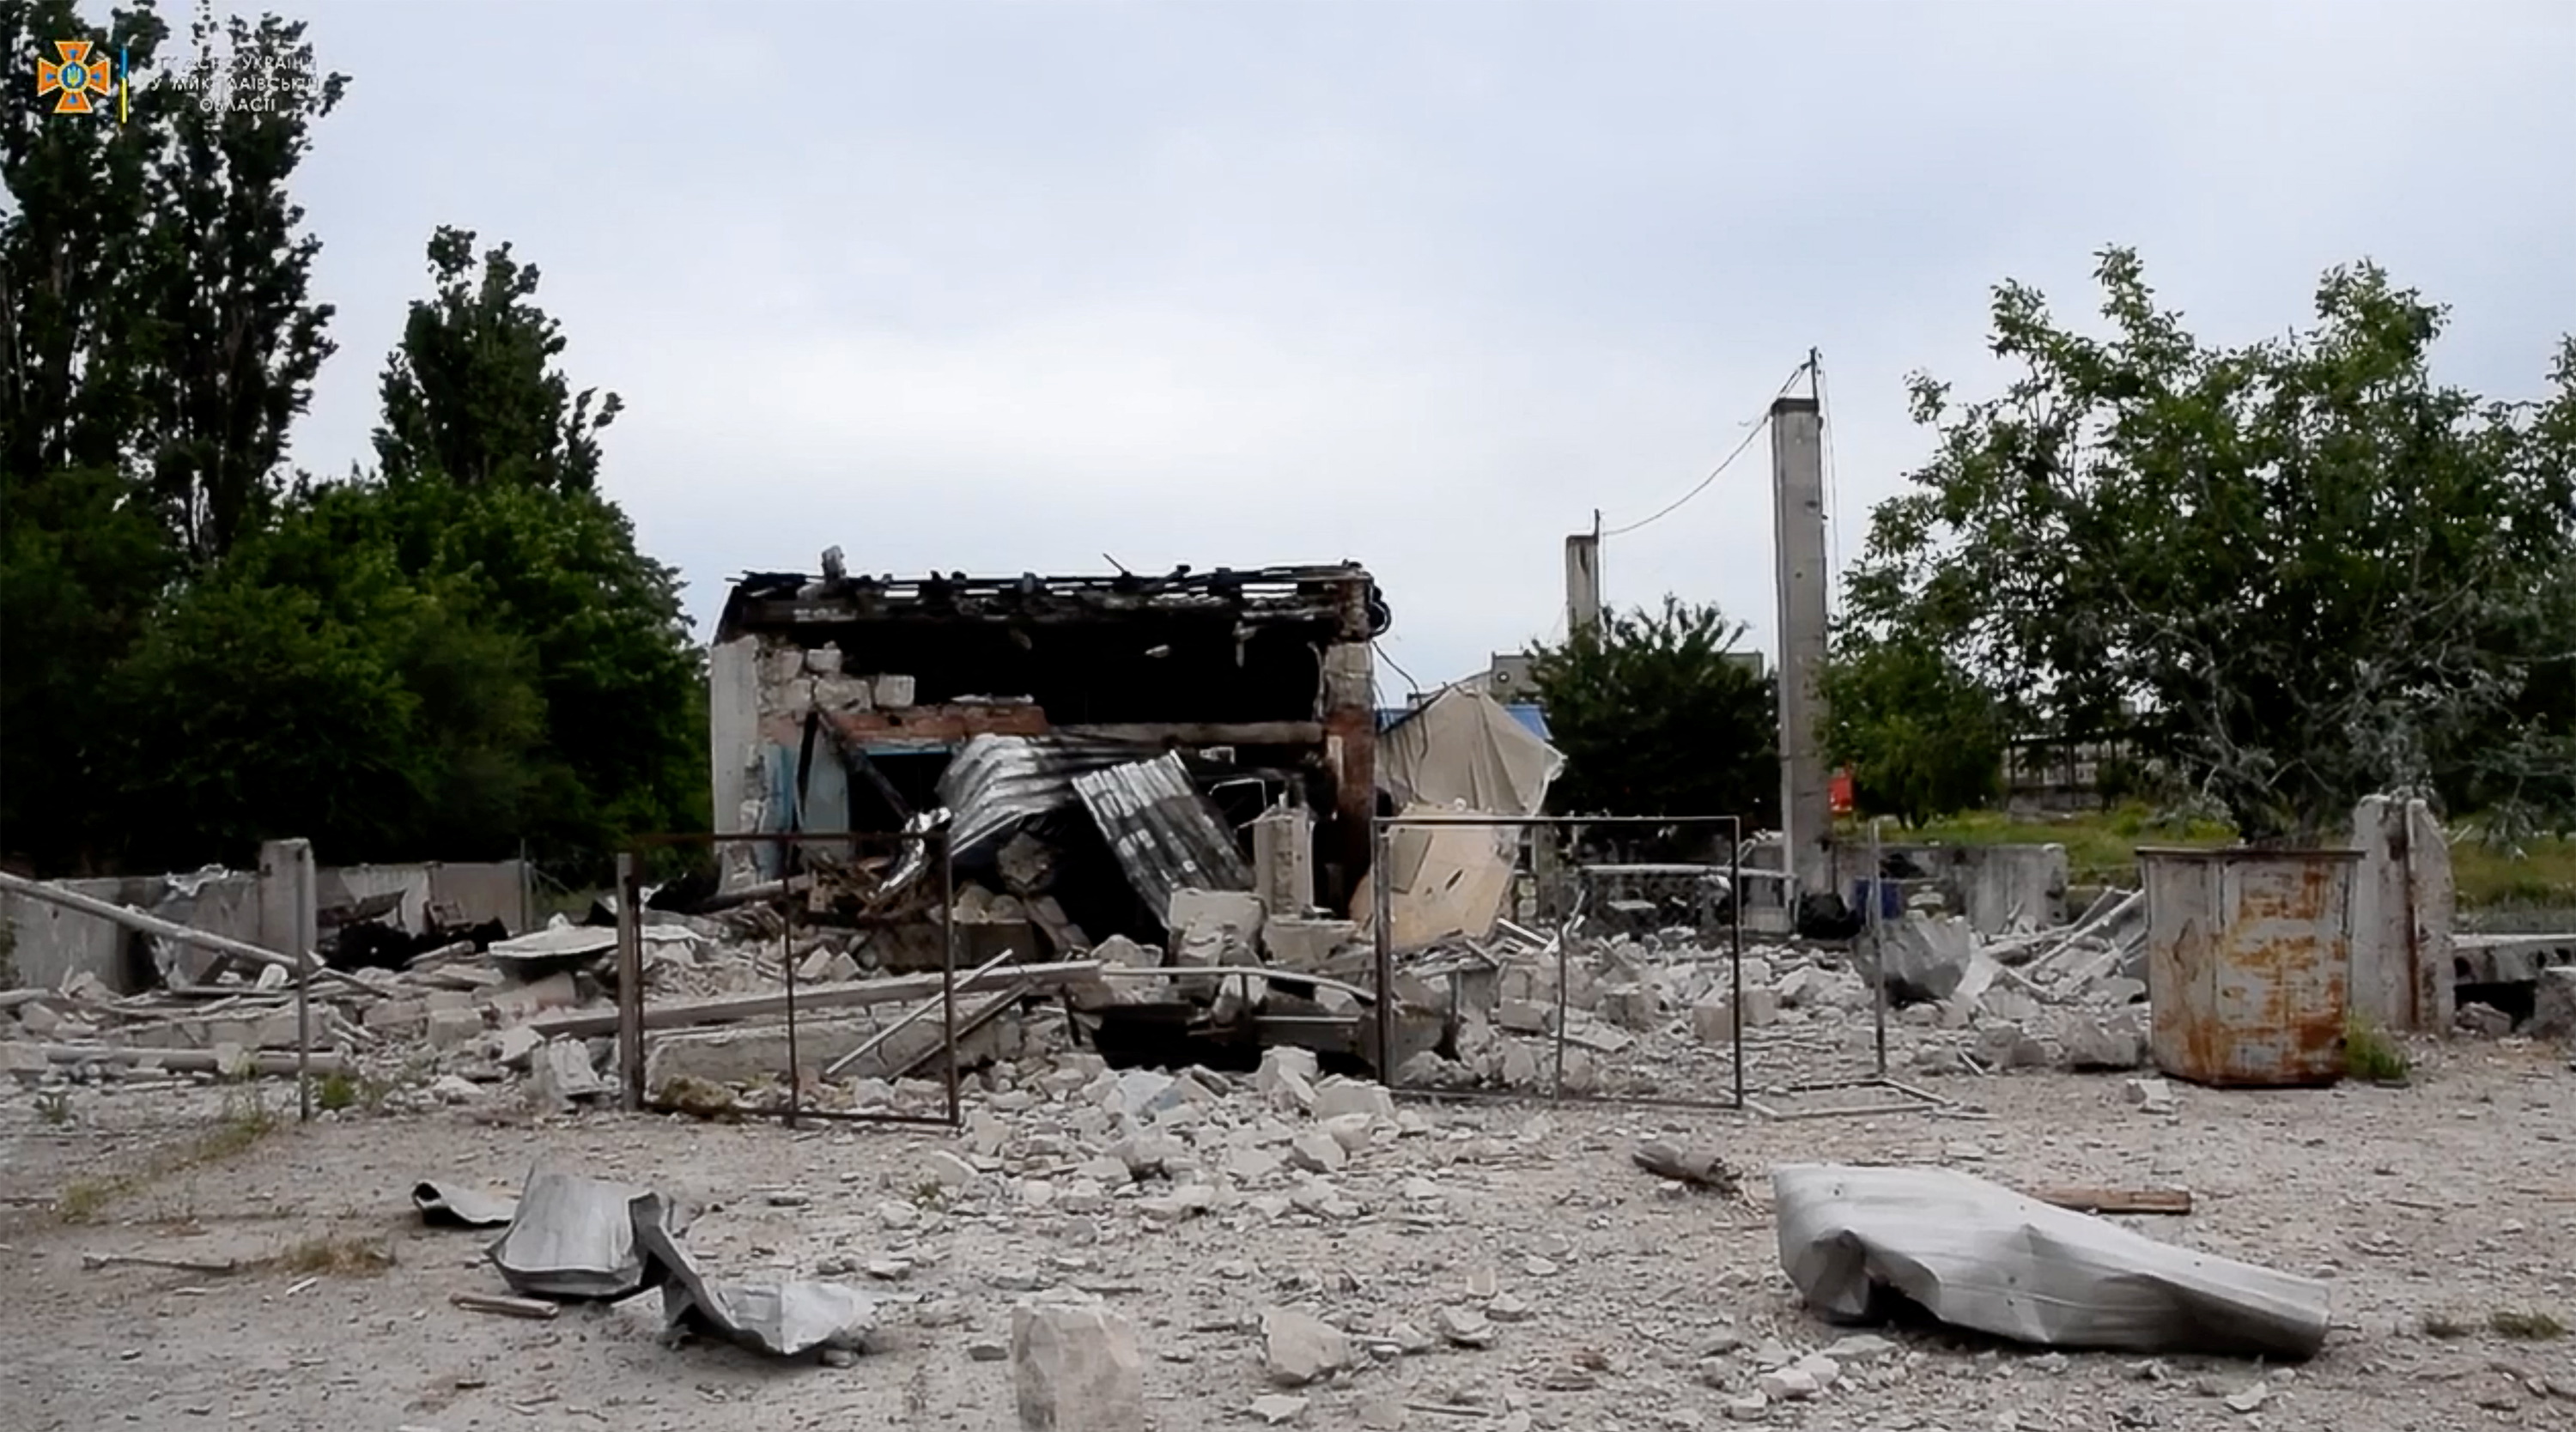 A view of a destroyed meat production facility in the aftermath of an attack, as Russia's invasion of Ukraine continues, at a location given as Mykolaiv